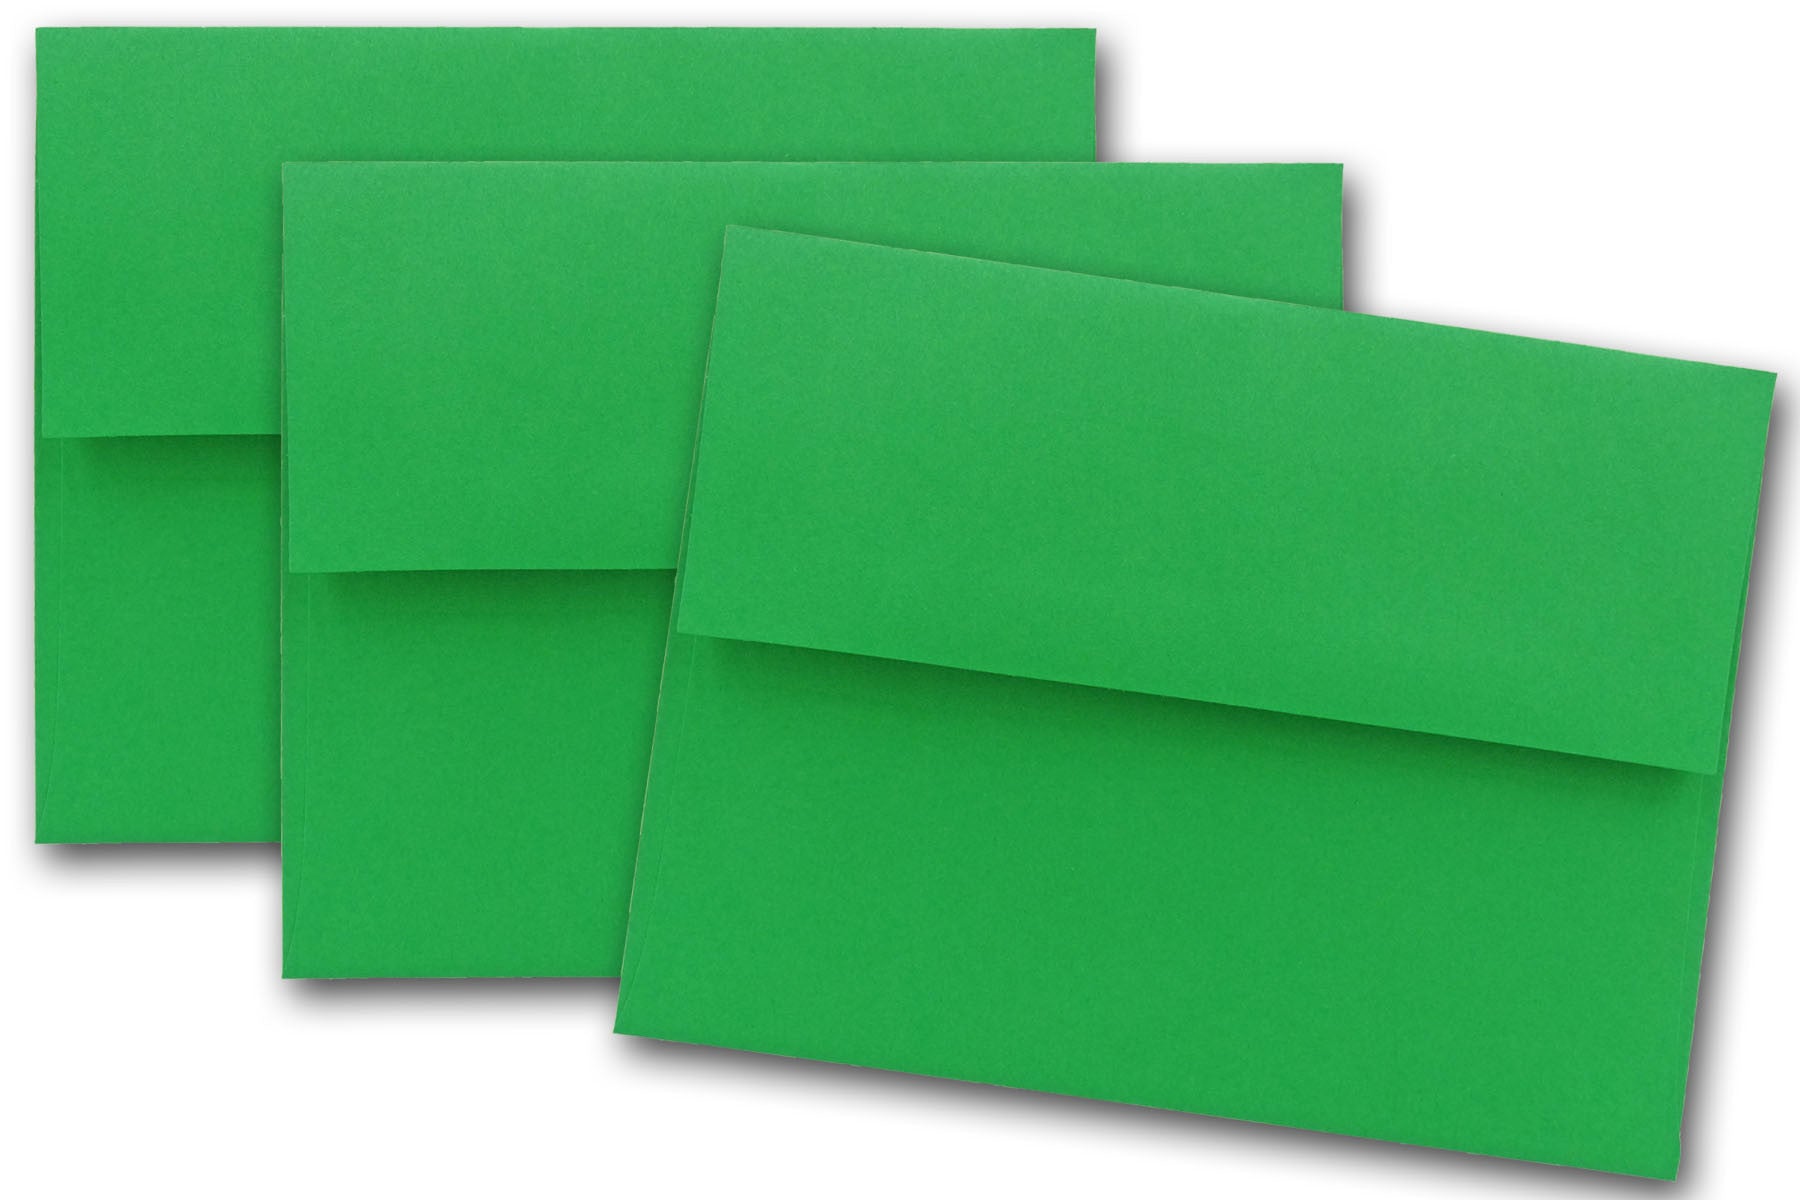 Vibrant Astrobright A2 Envelopes for note cards and announcements